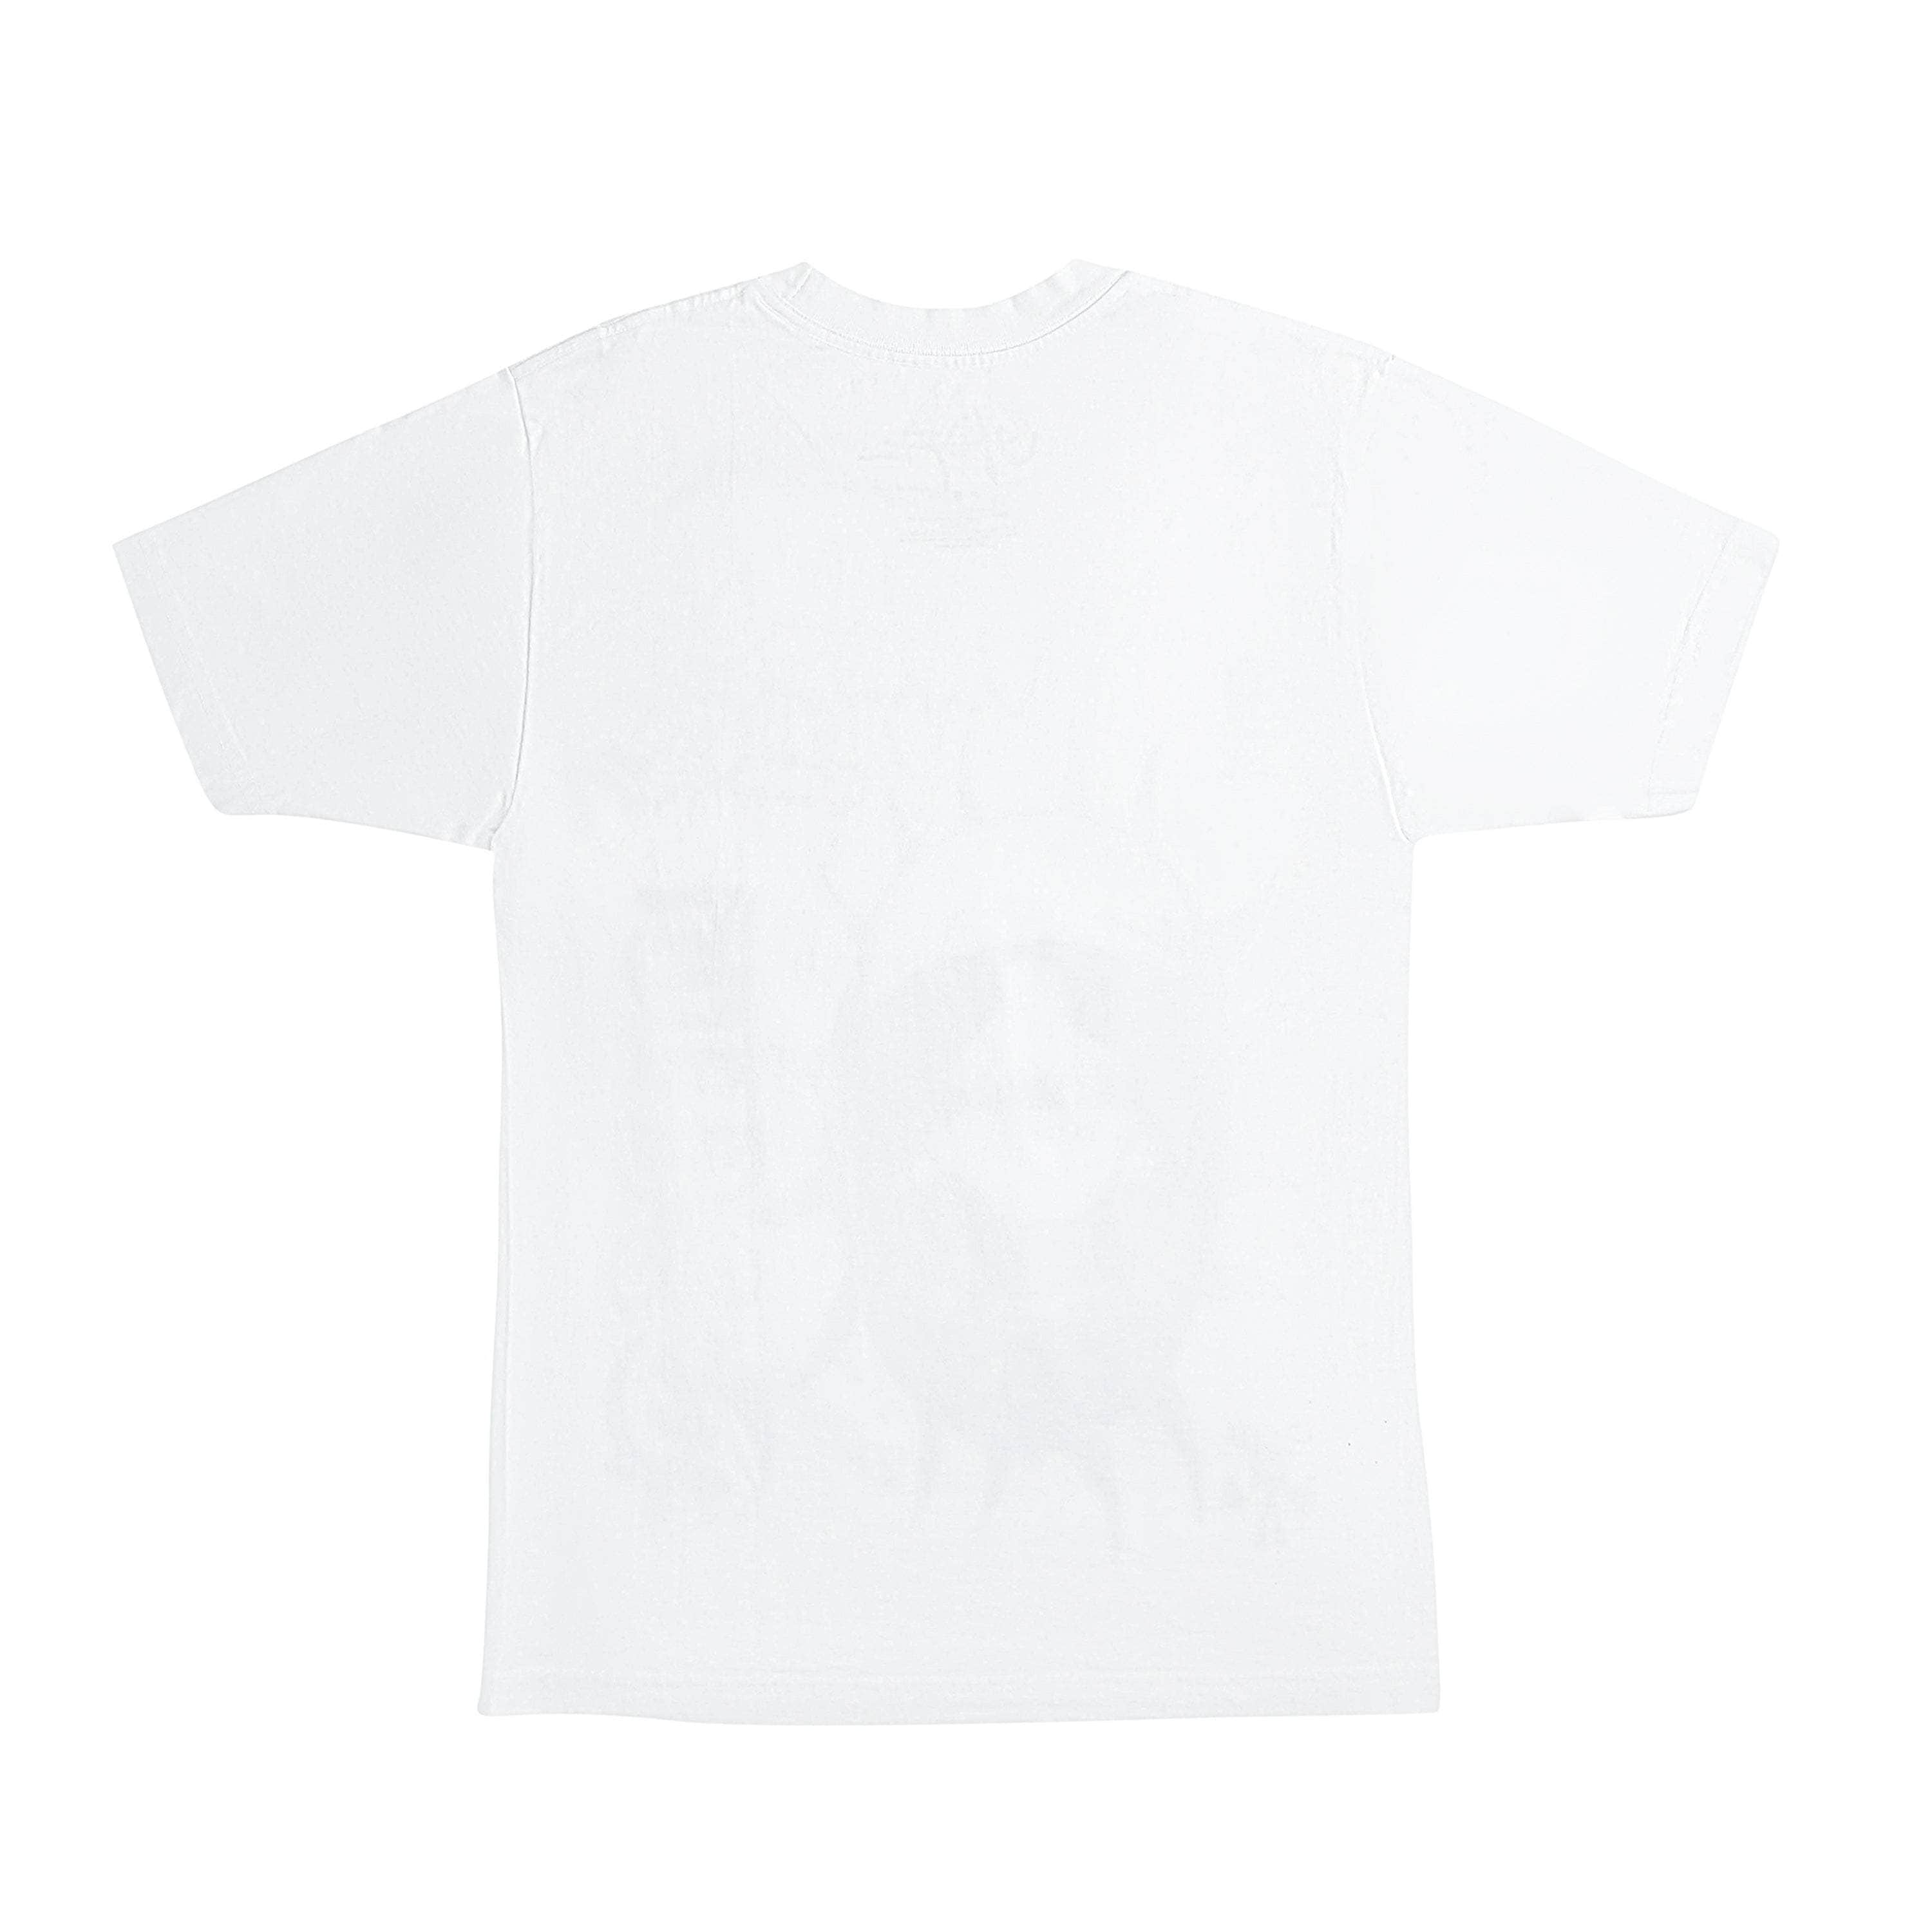 Travis Scott channelenable-all, chicmi, couponcollection, main-clothing, shop375, Stadium Goods, under-250 White C1 T-Shirt